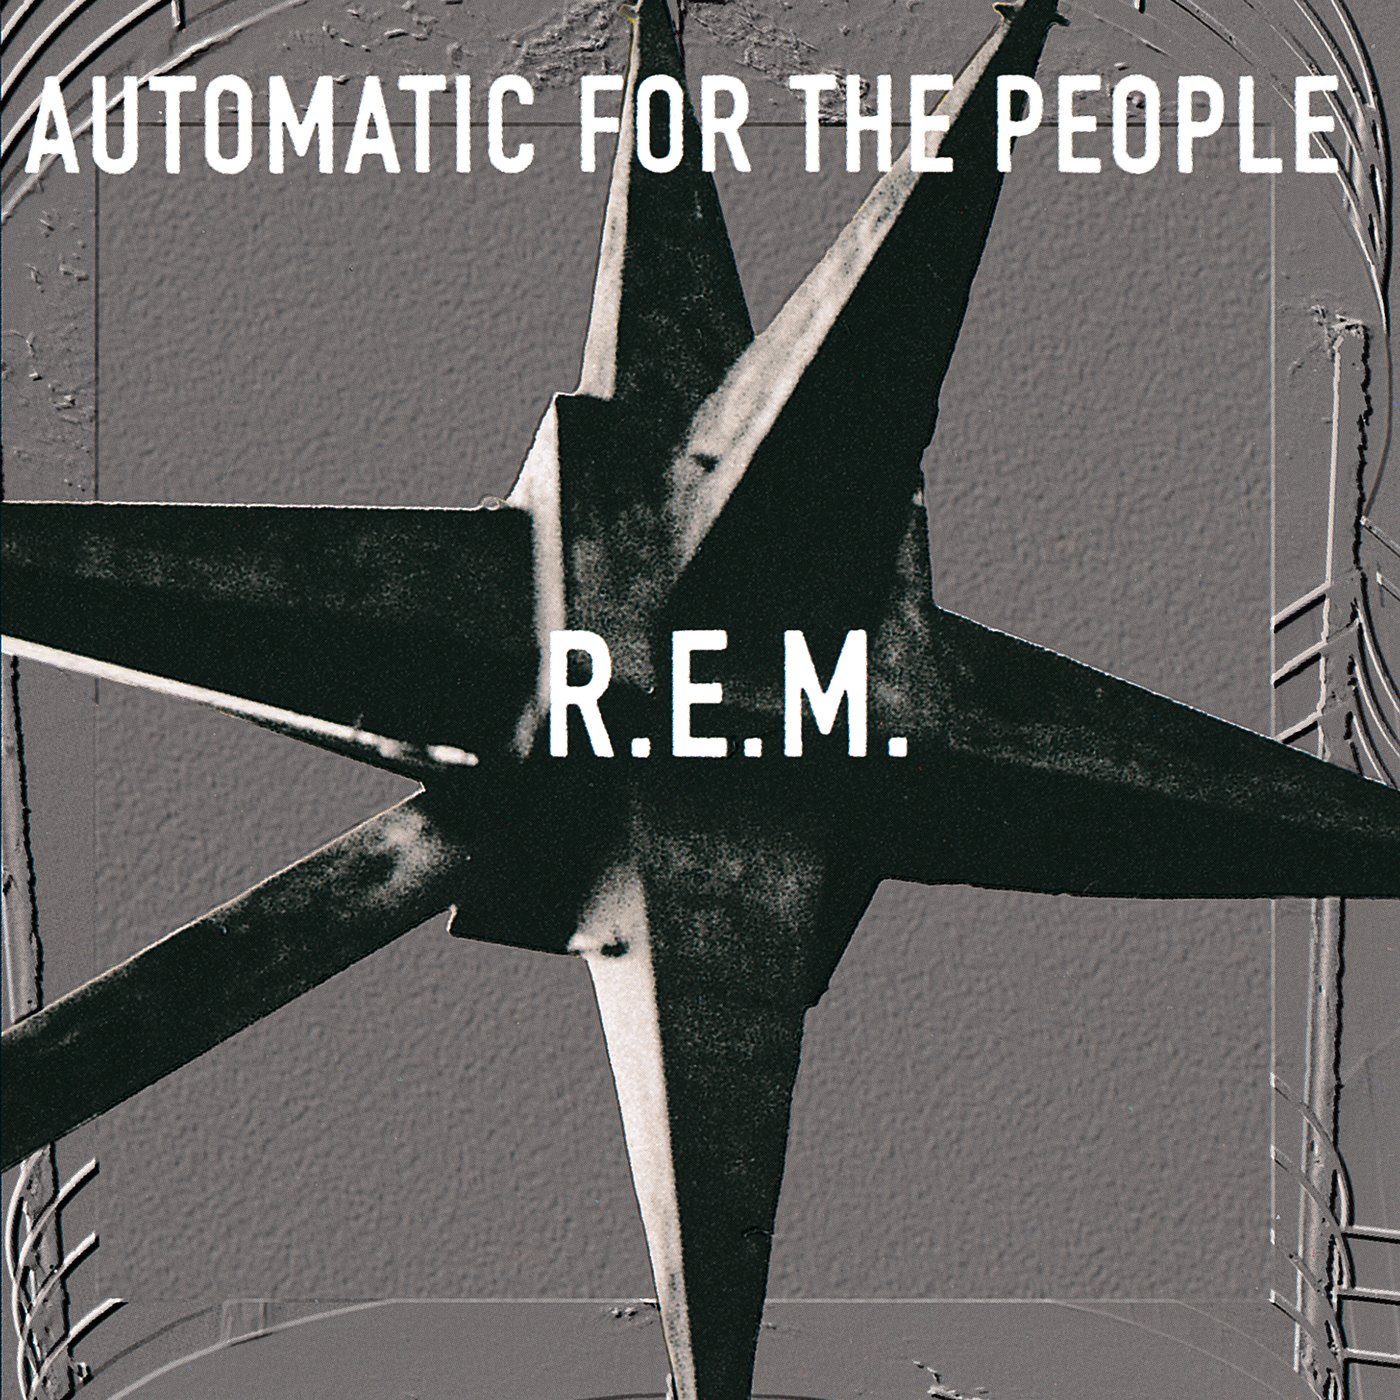 R.E.M. - Automatic For The People (1992)